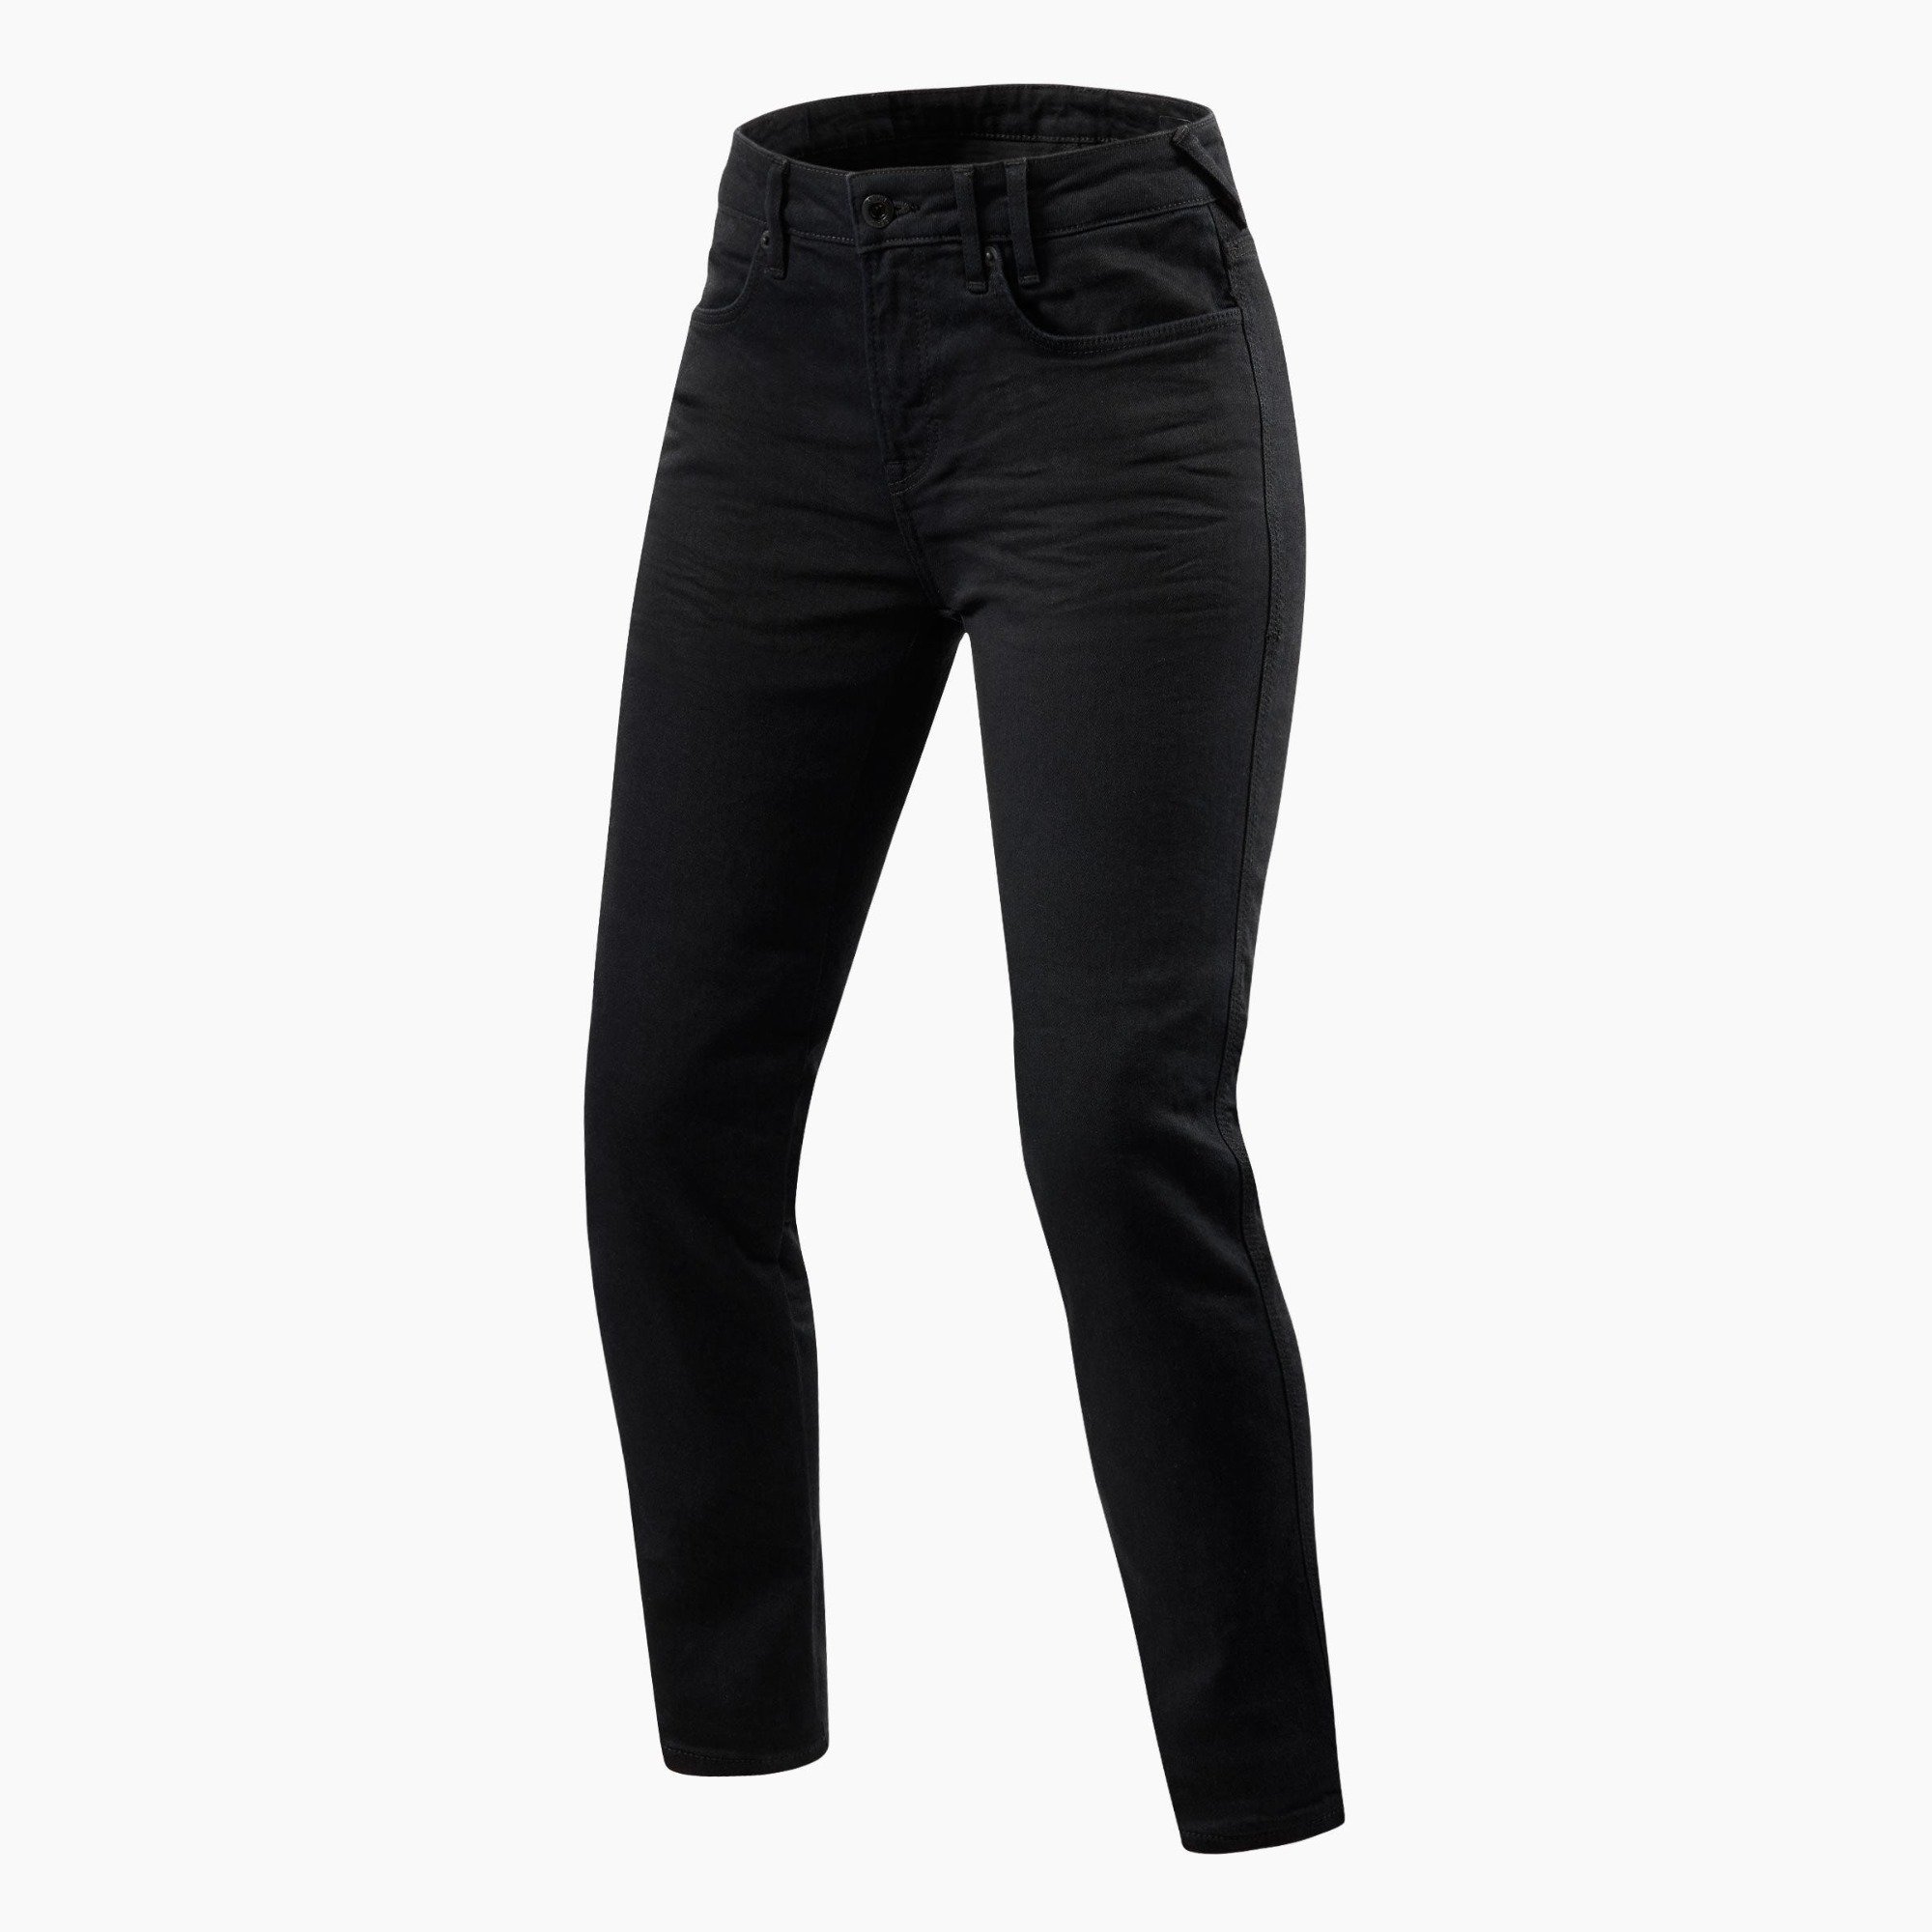 Image of REV'IT! Jeans Maple 2 Ladies SK Black Motorcycle Jeans Size L32/W24 ID 8700001342193